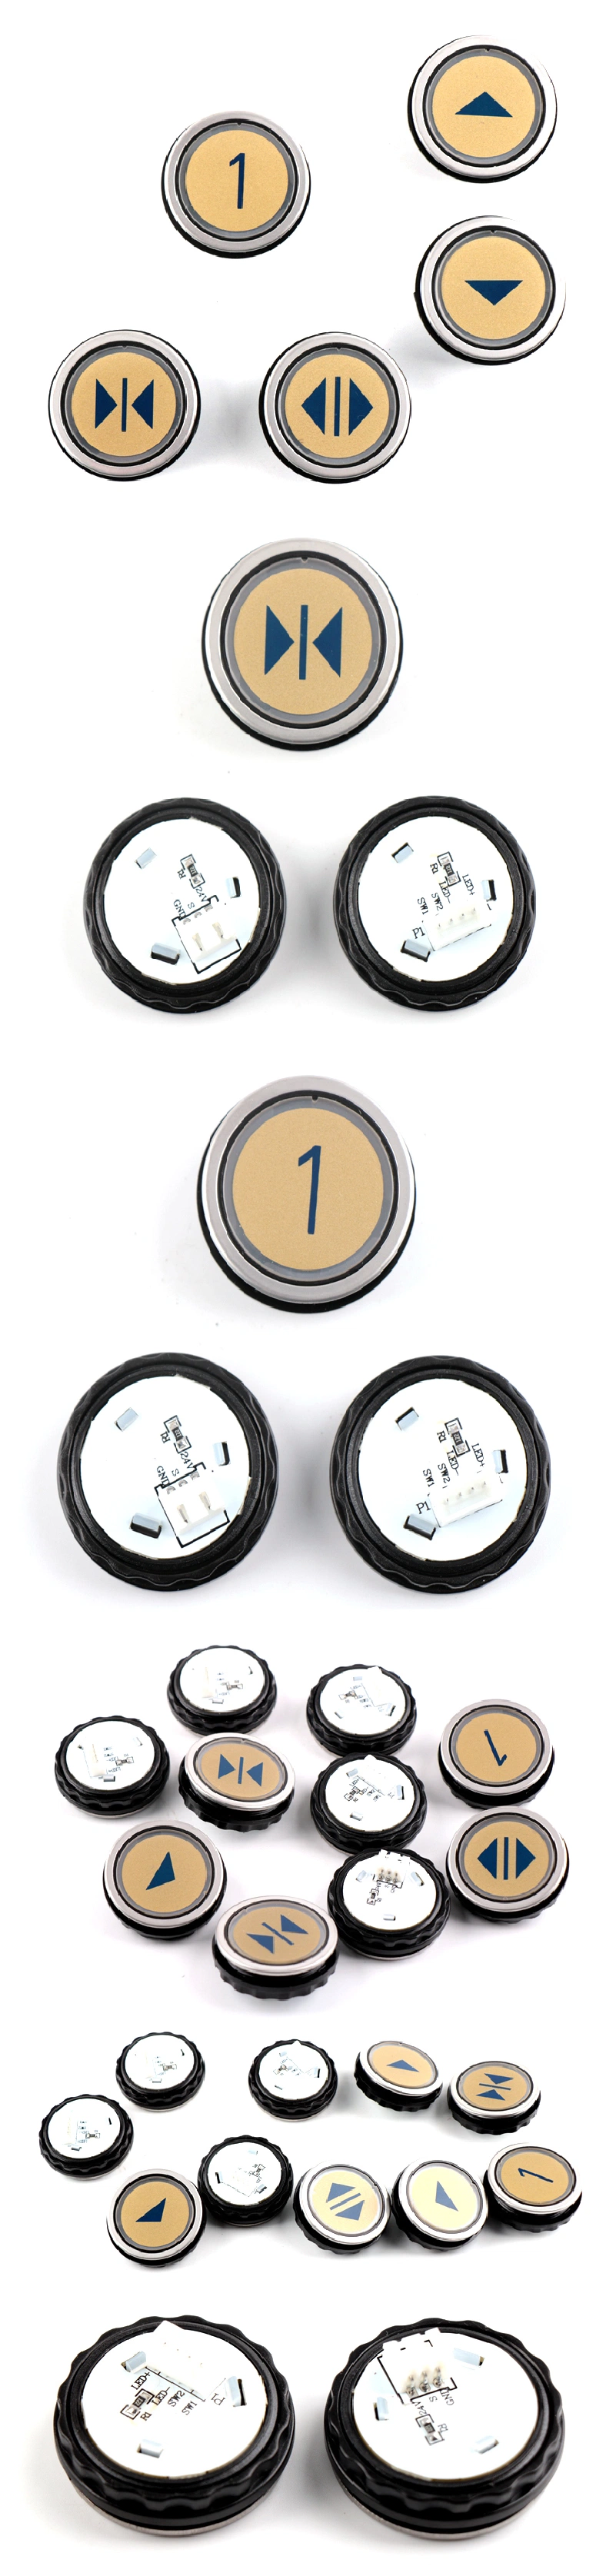 5400 Elevator Round Button D-Type Three Four-Pin D2-Cl D4-Cl Elevator Button